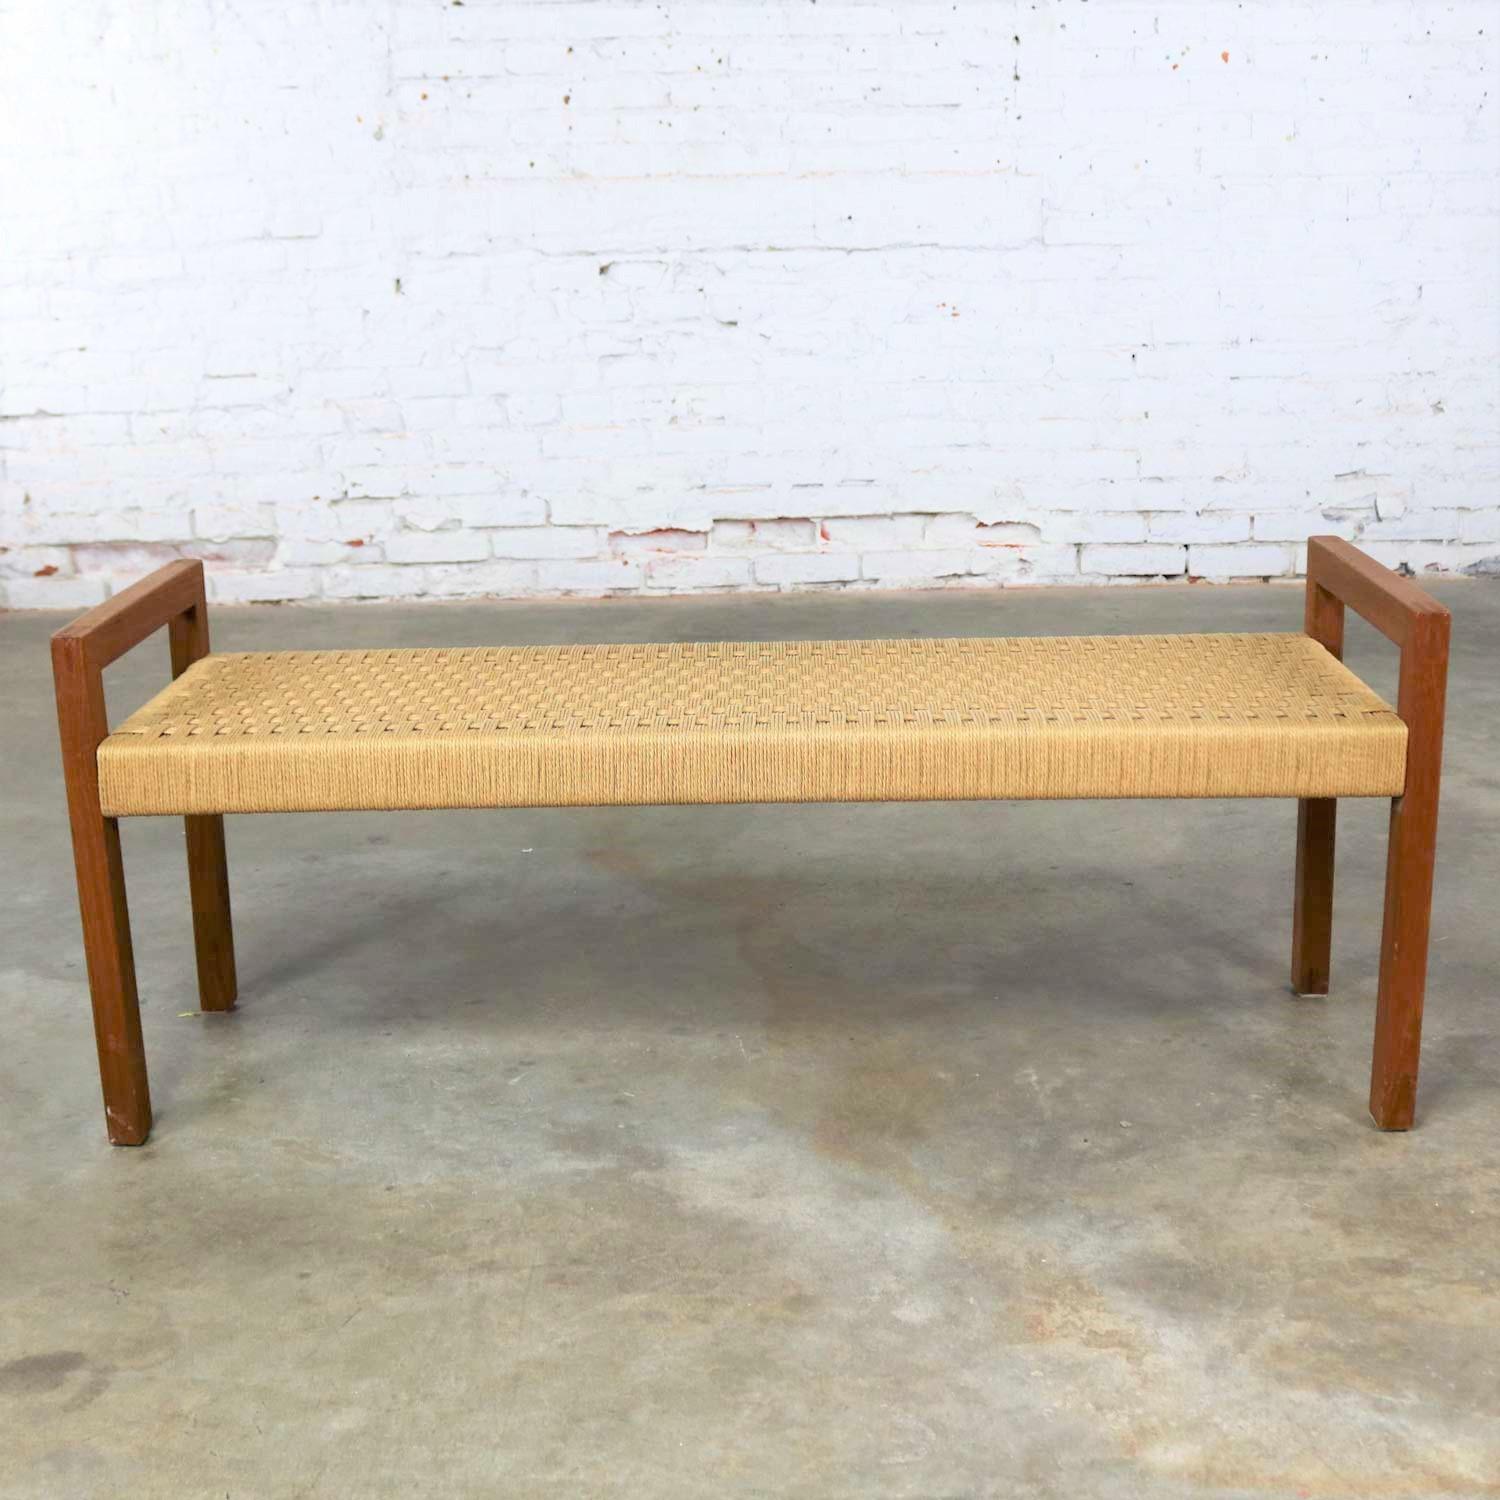 Handsome Scandinavian modern style teak bench with woven rope seat by Sun Cabinet Company. It is in wonderful condition with normal wear for its age, circa early 21st century.

Sometimes you need just the right little bench. This is it. It’s not a